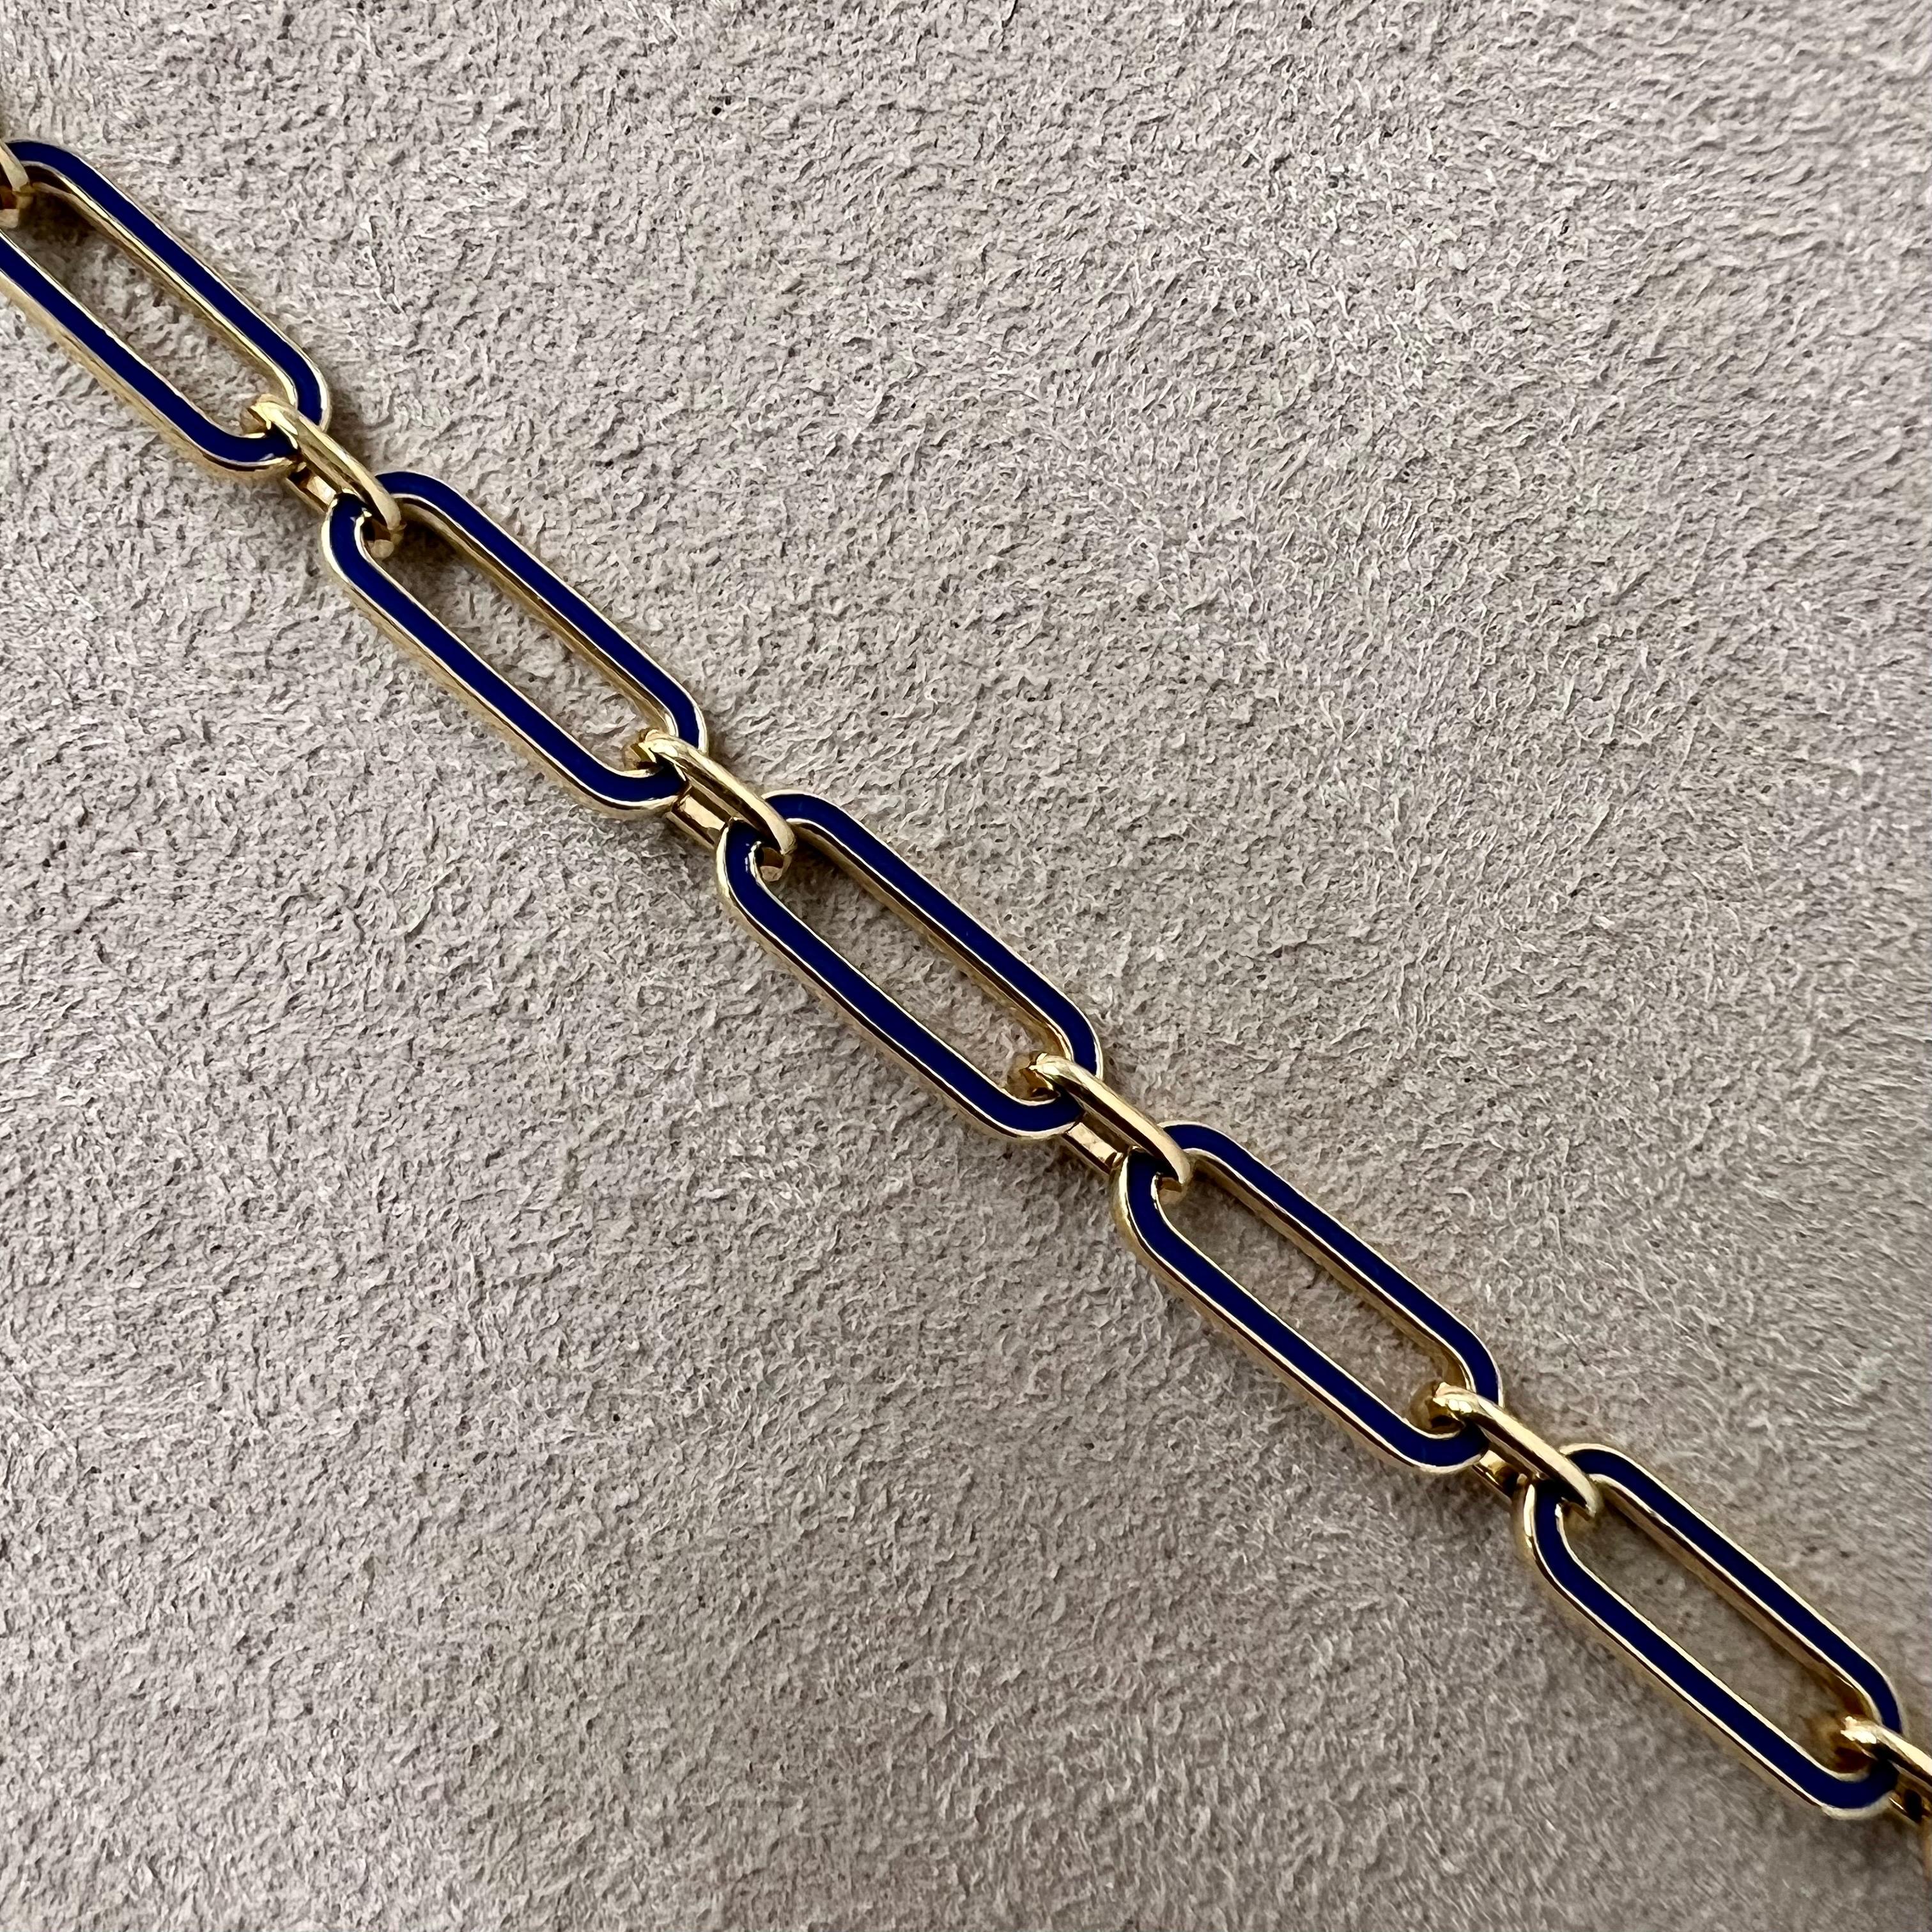 Created in 18 karat yellow gold
Lapis enamel details
8 inch length 
18 karat yellow gold lobster clasp
Bracelet can be clasped at any length
Also available in various lengths

Fabricated from 18 karat yellow gold, this 8 inch bracelet is intricate